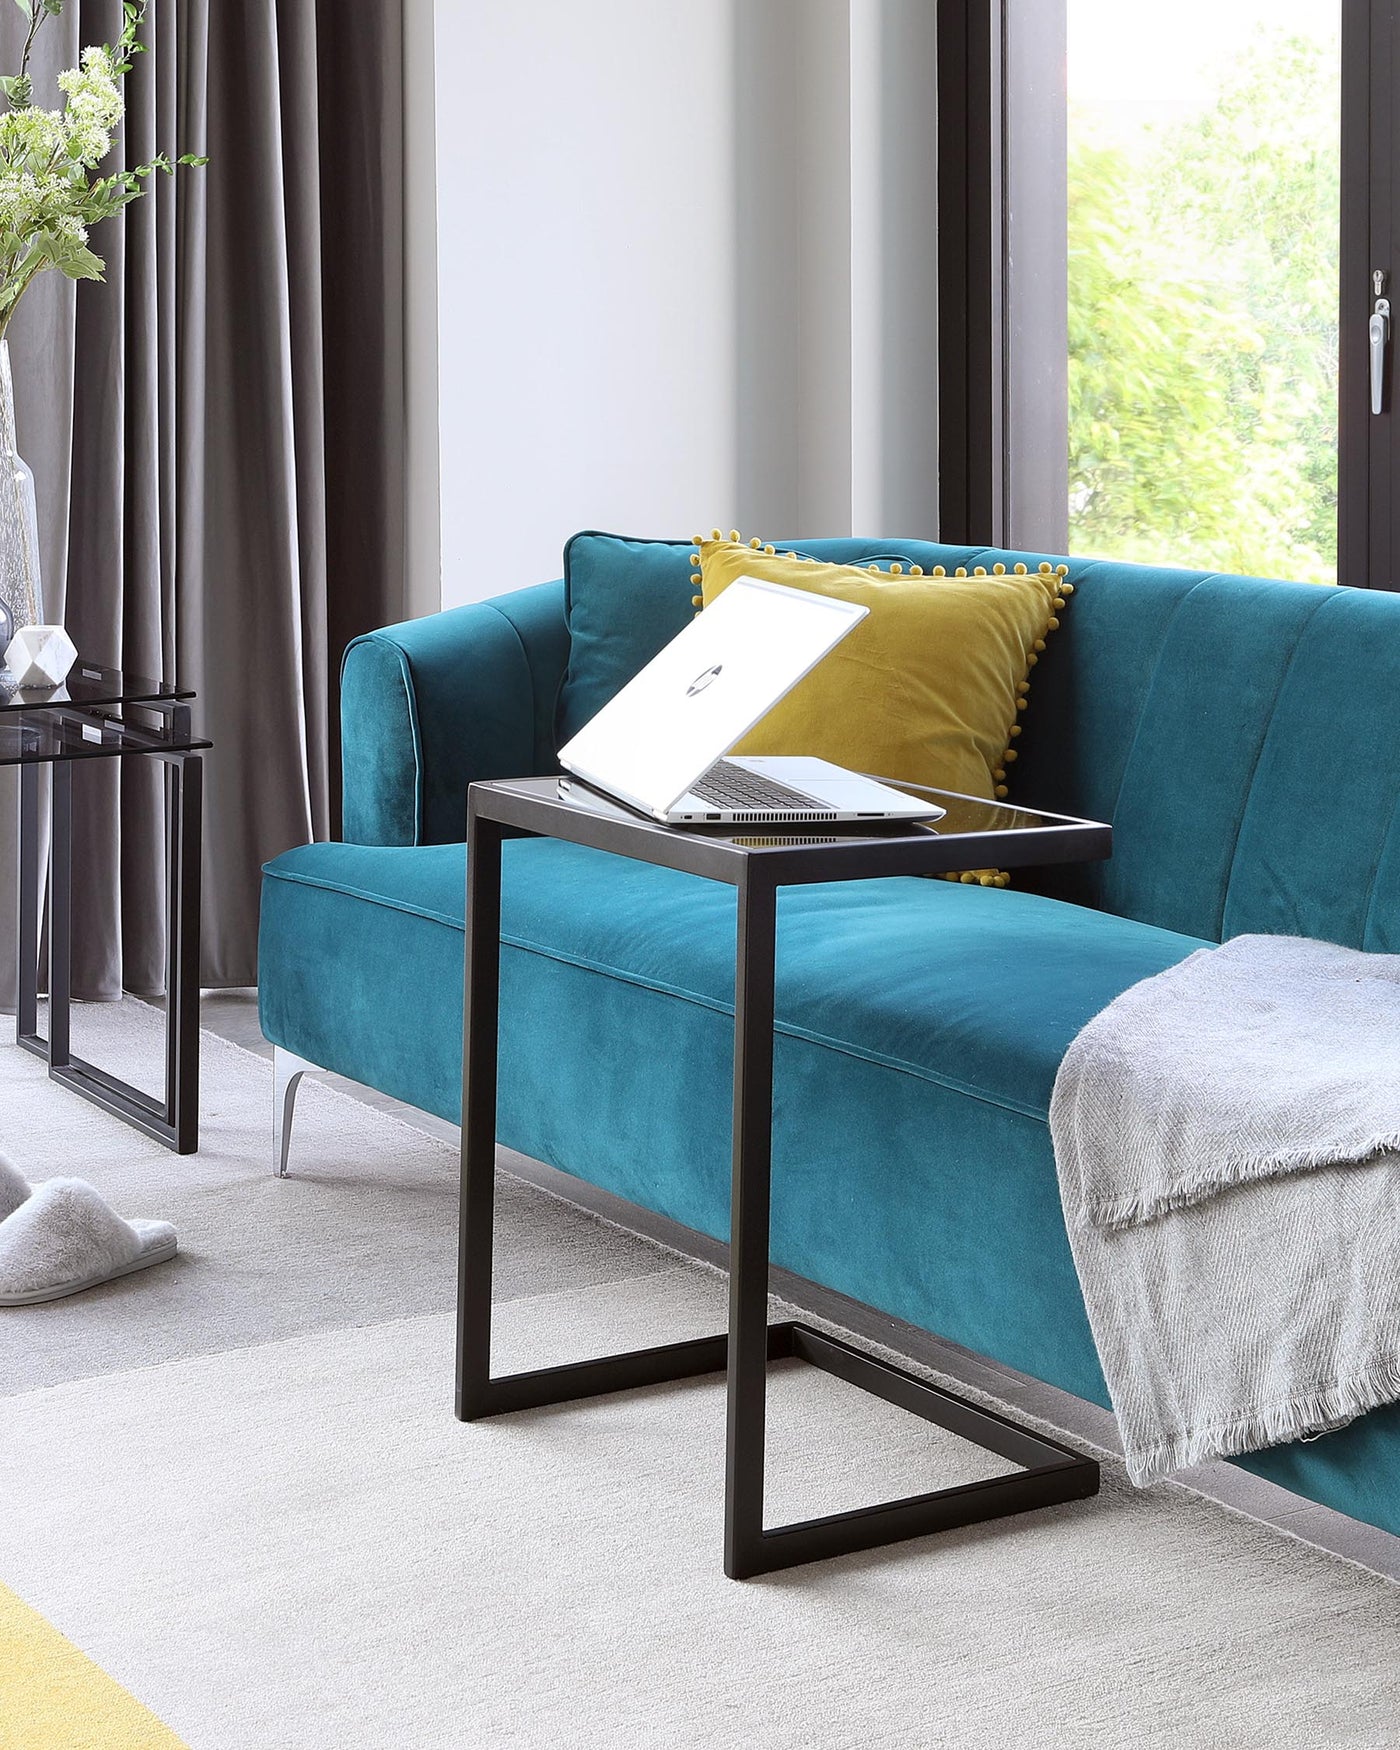 Contemporary teal fabric sofa with tufted backrest and brass-studded detailing, paired with a sleek black metal frame side table featuring a glass top.